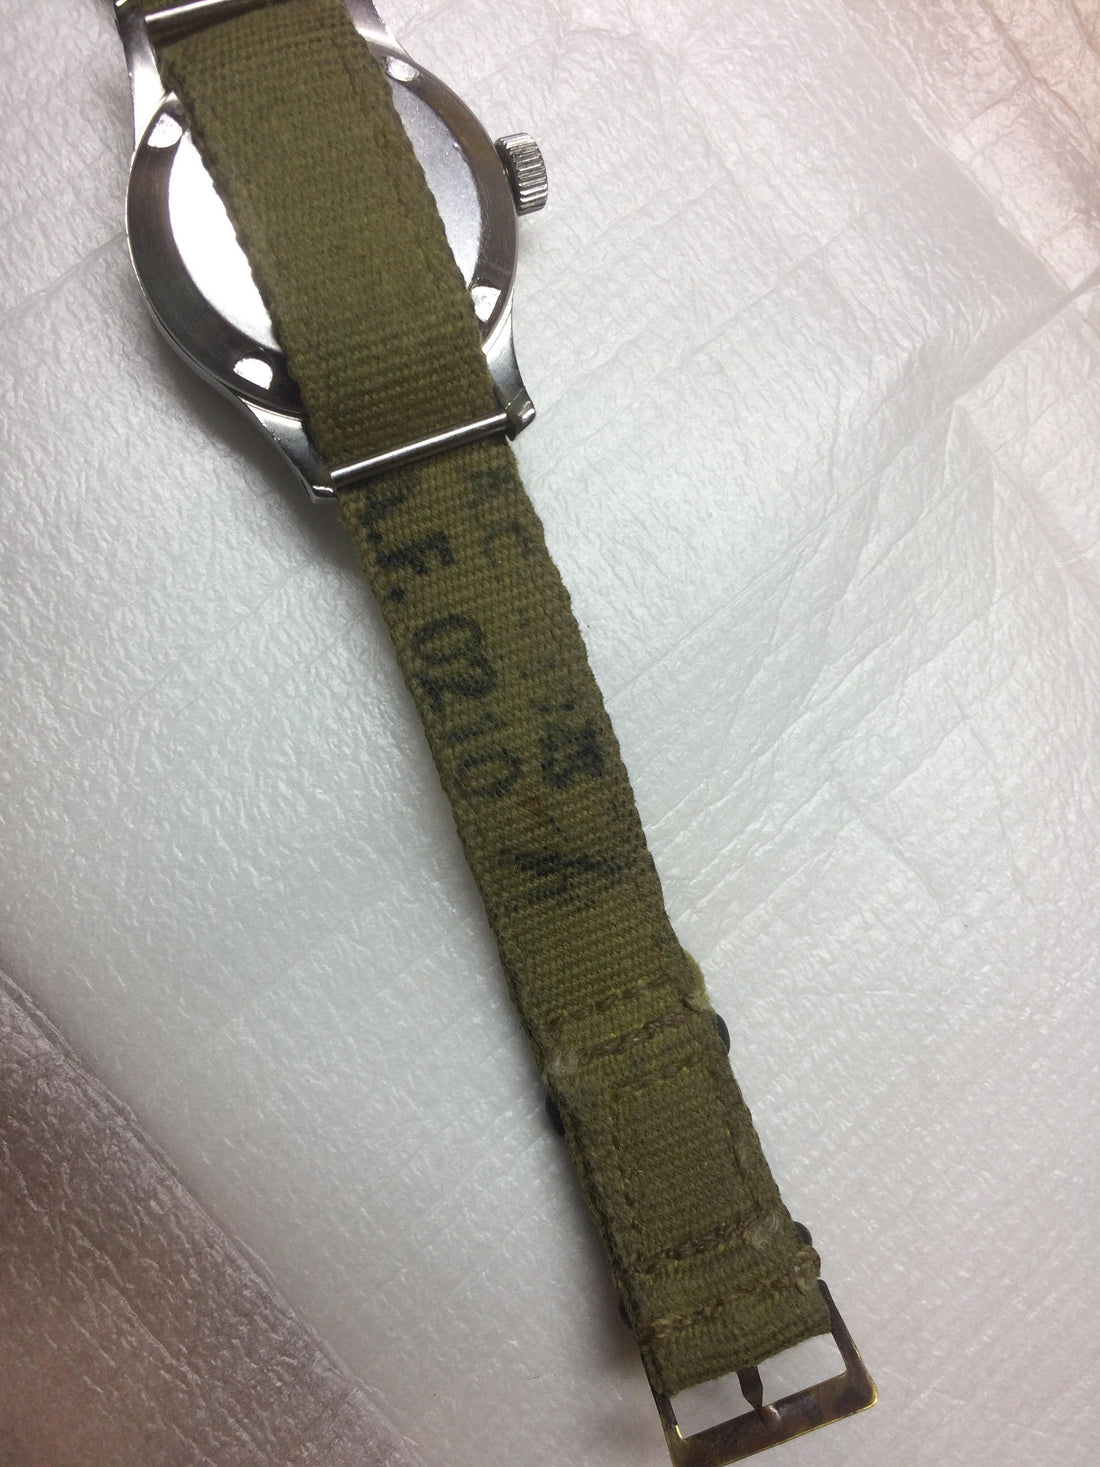 IS THIS THE OLDEST A.F.0210 STRAP?